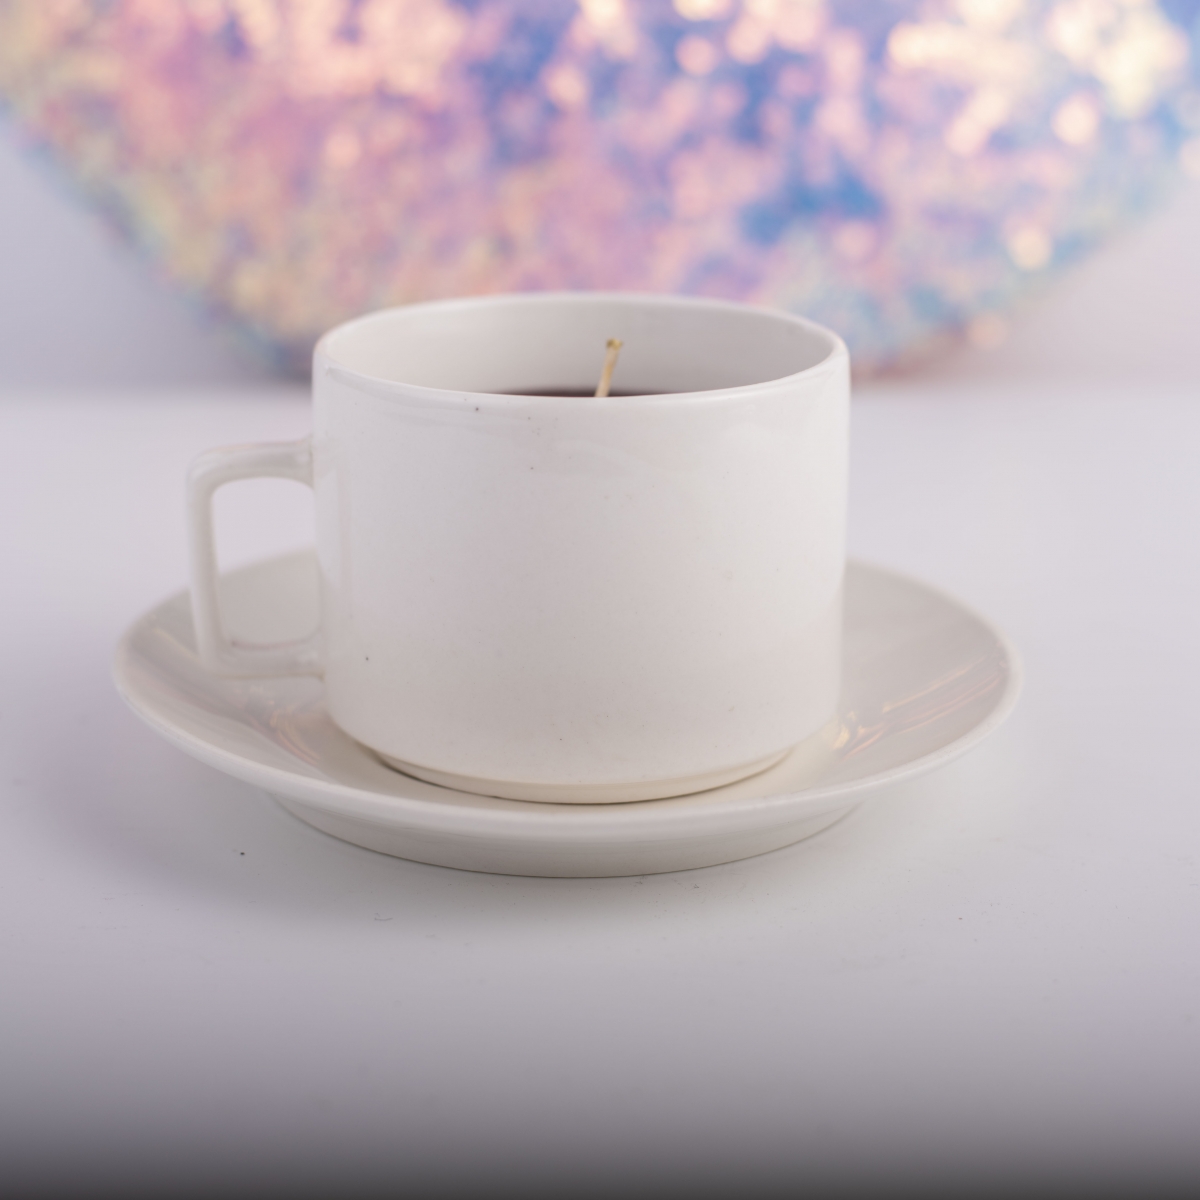 Espresso Candles : White Ceramic ,Cup and Plate Set, Coffee Candles, Table Centerpiece ,China Factory ,Price-HOWCANDLE-Candles,Scented Candles,Aromatherapy Candles,Soy Candles,Vegan Candles,Jar Candles,Pillar Candles,Candle Gift Sets,Essential Oils,Reed Diffuser,Candle Holder,